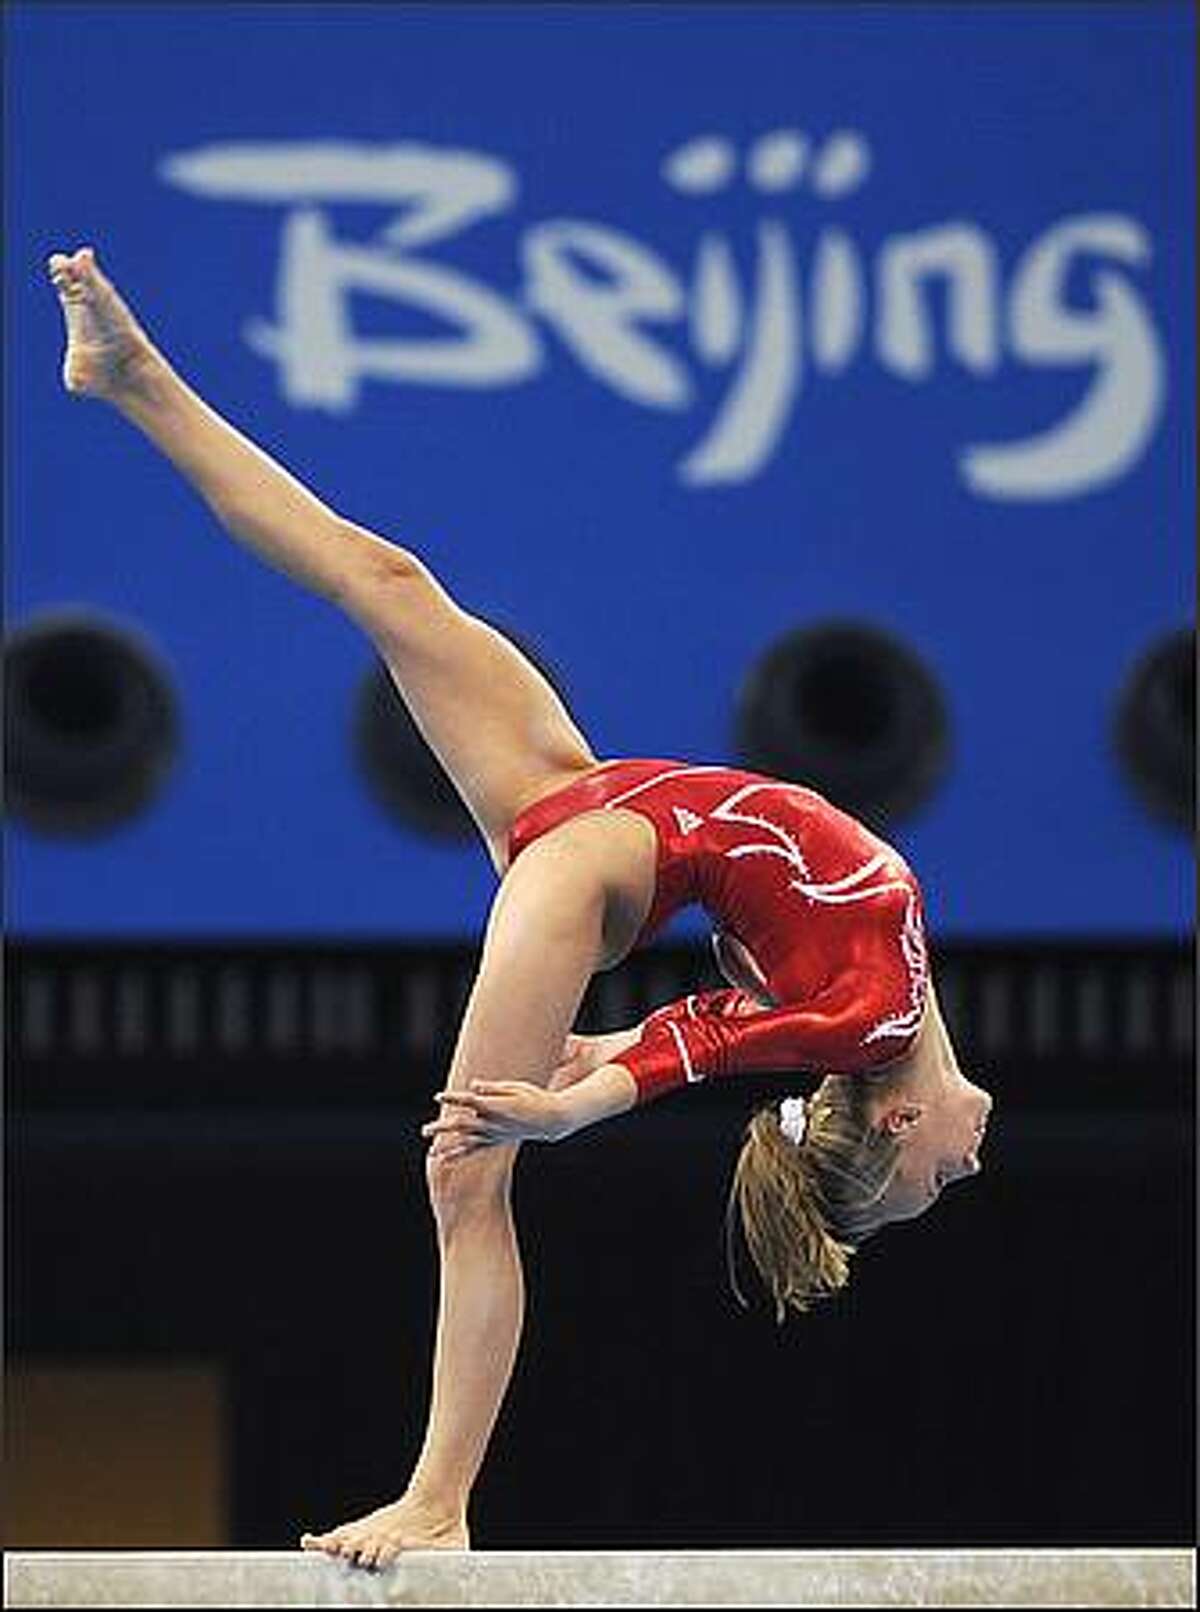 United States' Nastia Liukin competes on the balance beam during the women's team final of the artistic gymnastics event of the Beijing 2008 Olympic Games in Beijing. China won the gold, while United States won the silver and Romania the bronze. (Photo FRANCK FIFE/AFP/Getty Images)